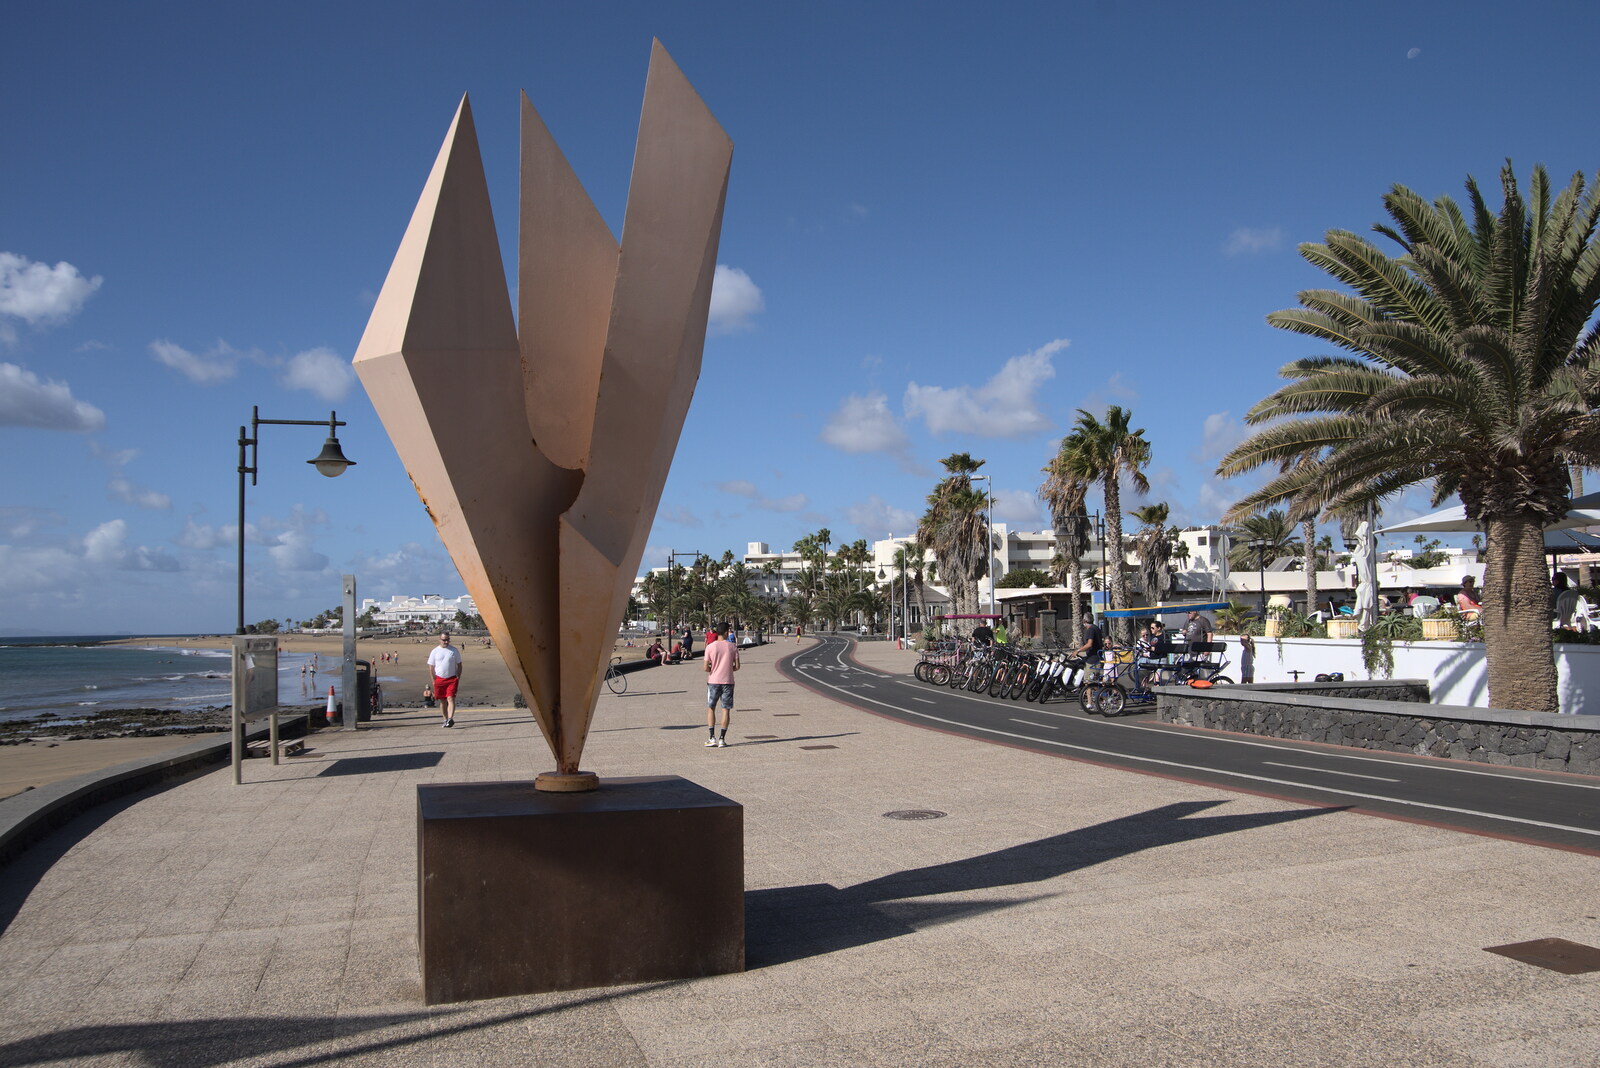 A funky sculpture on the promenade from Five Days in Lanzarote, Canary Islands, Spain - 24th October 2021